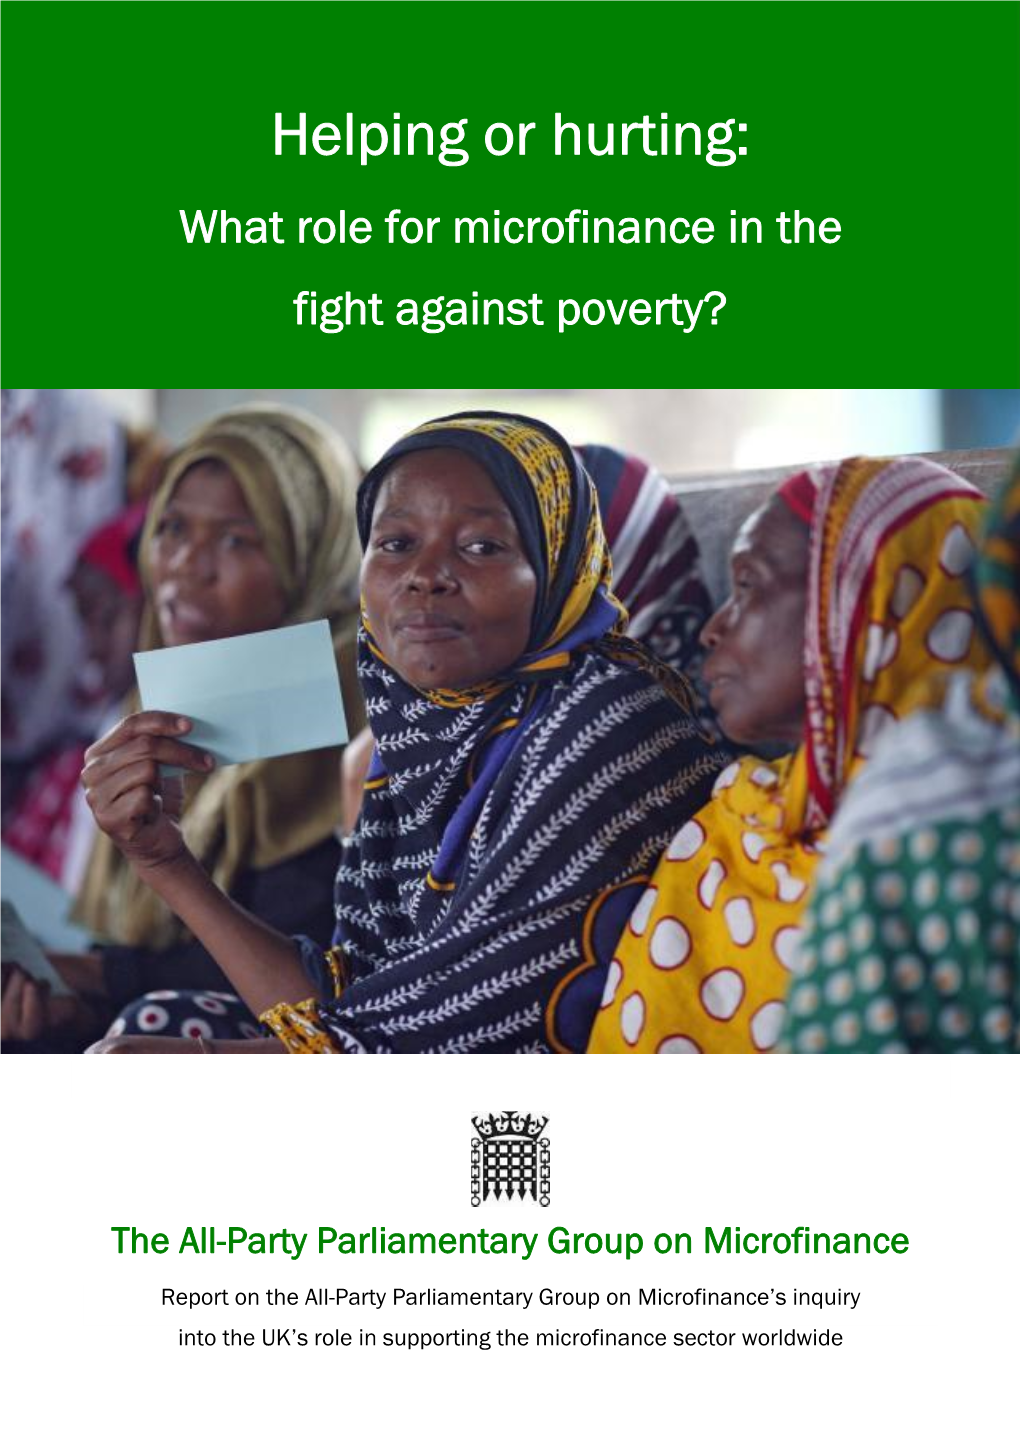 Helping Or Hurting: What Role for Microfinance in the Fight Against Poverty?